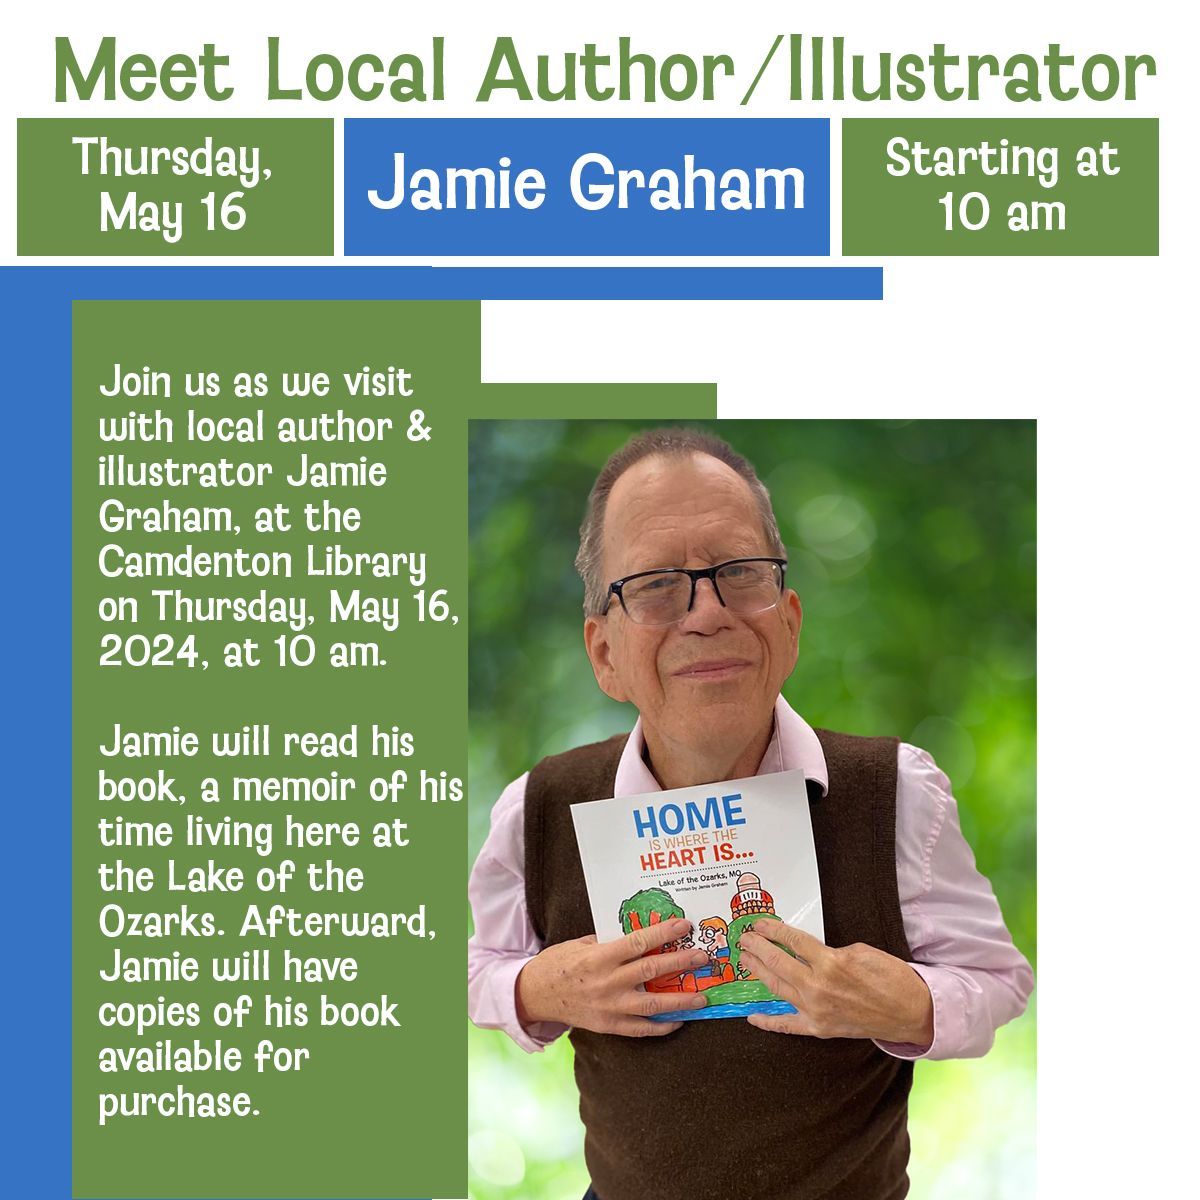 Local author & illustrator, Jamie Graham, will be at the #CamdentonLibrary to read his latest book, 'Home is Where the Heart Is...' a memoir of Jamie's life at the Lake of the Ozarks. You won't want to miss this #AuthorVisit on Thursday, May 16, 2024, at 10 am.